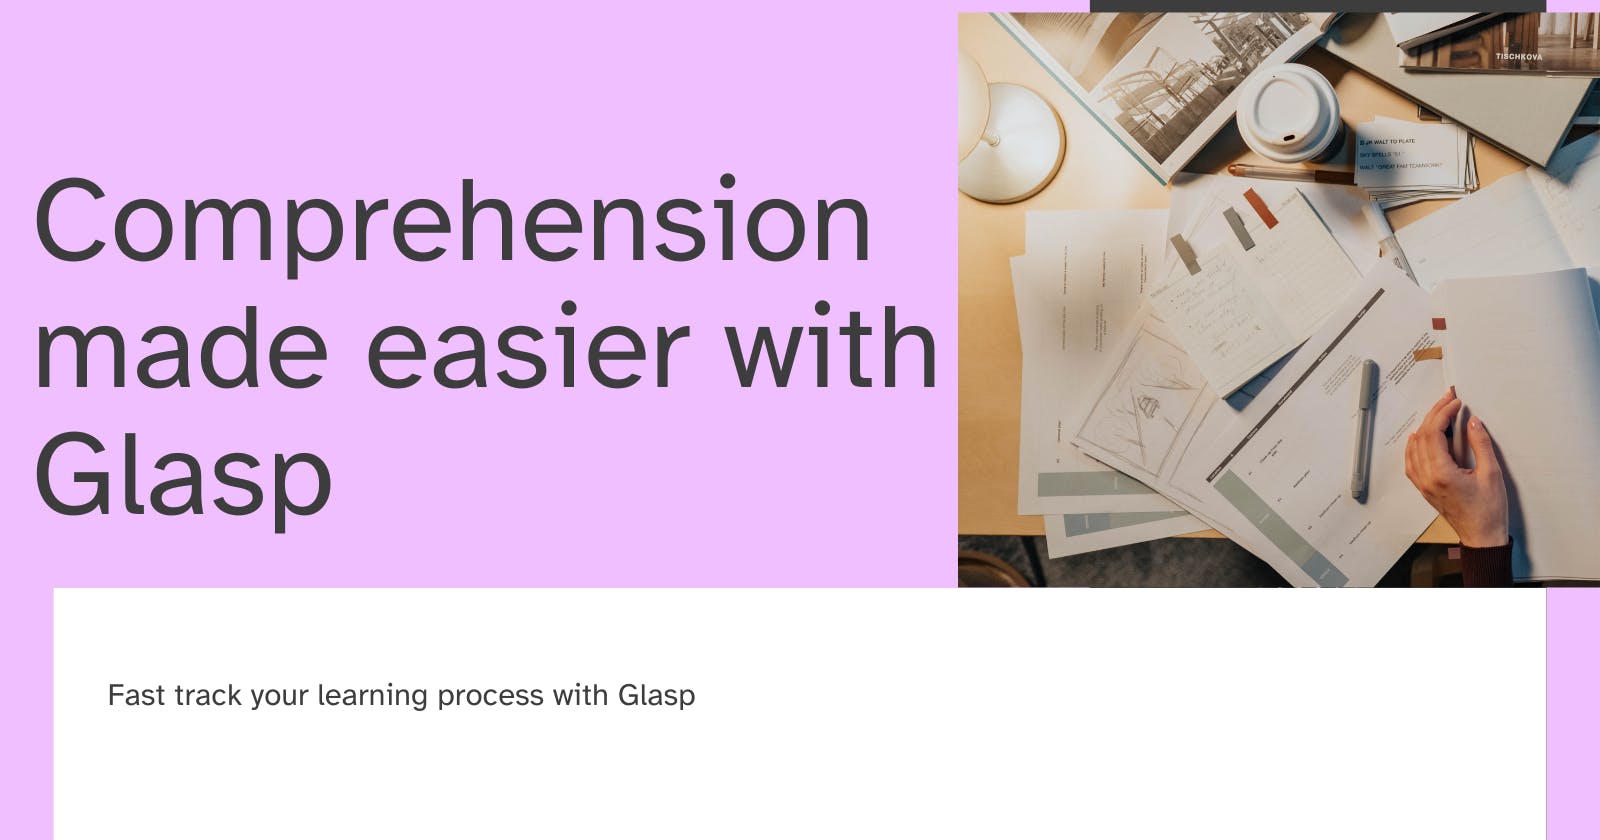 Comprehension made easier with Glasp